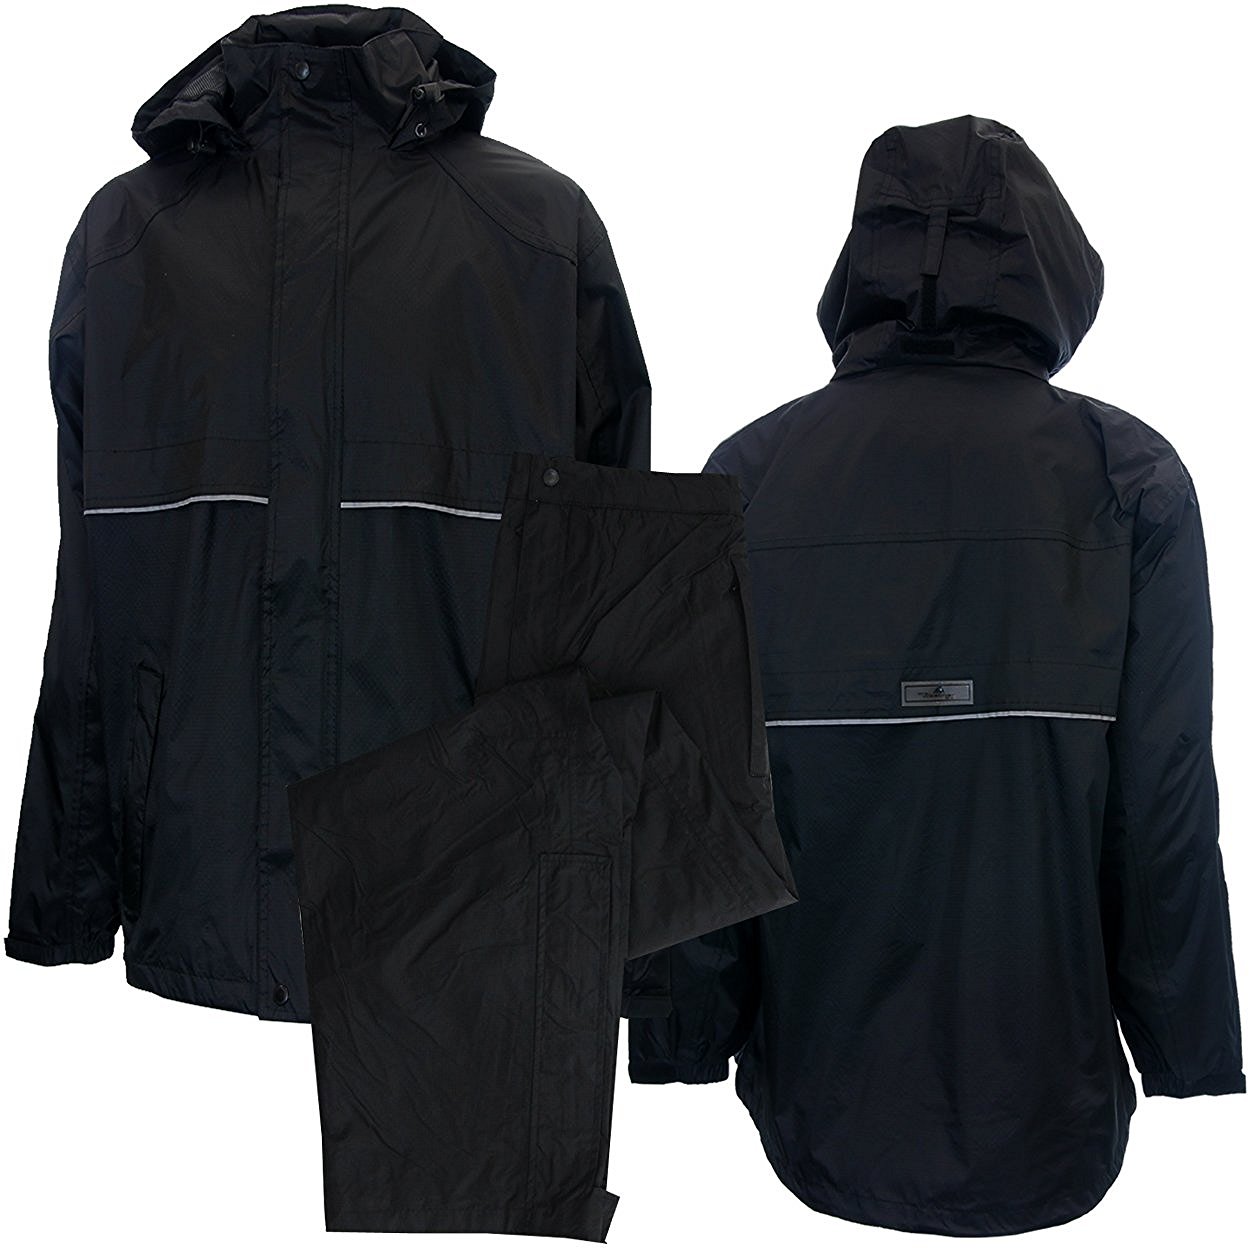 The Weather Company Mens Golf Rain Suits